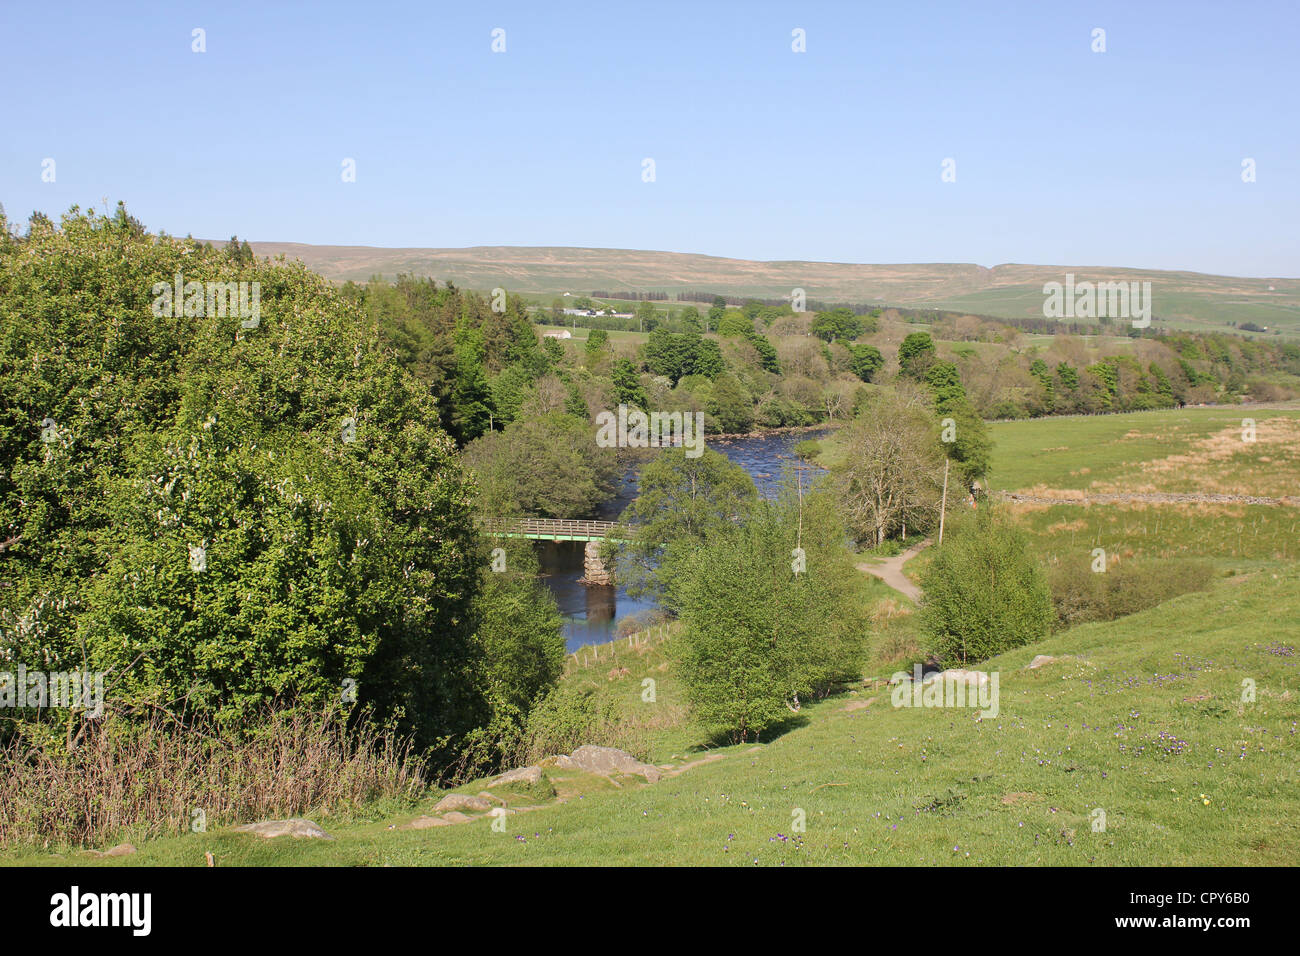 Teesdale scenes, North East England. 26th May 2012 - river views - looking downstream - near the spectacular High Force. Stock Photo